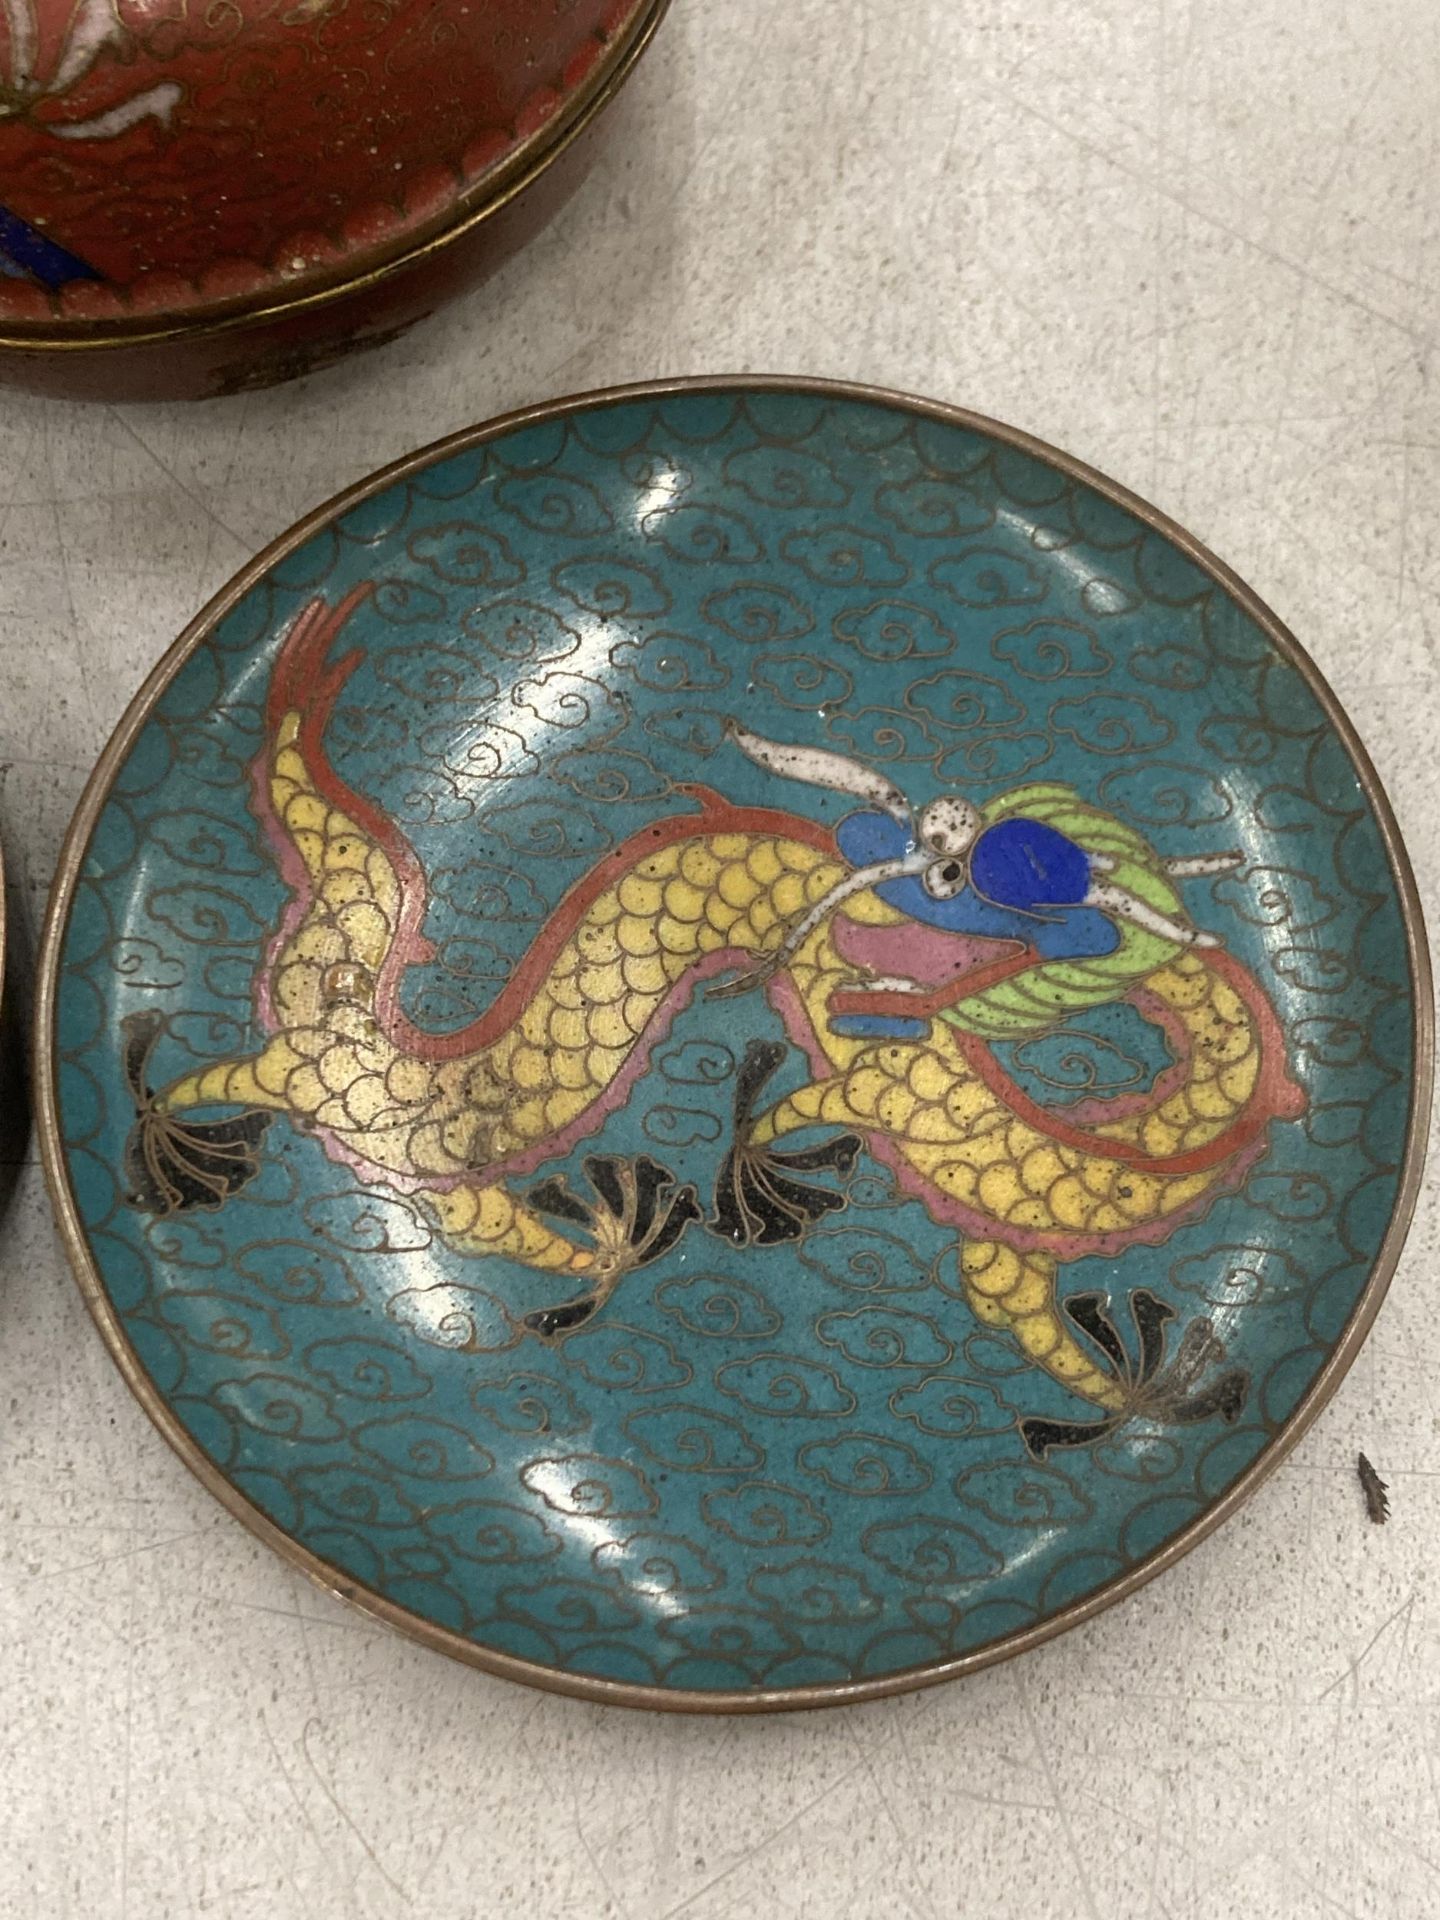 THREE CLOISONNE ITEMS WITH DRAGON DETAIL TO INCLUDE TWO PIN TRAYS AND A TRINKET BOX - Image 3 of 4